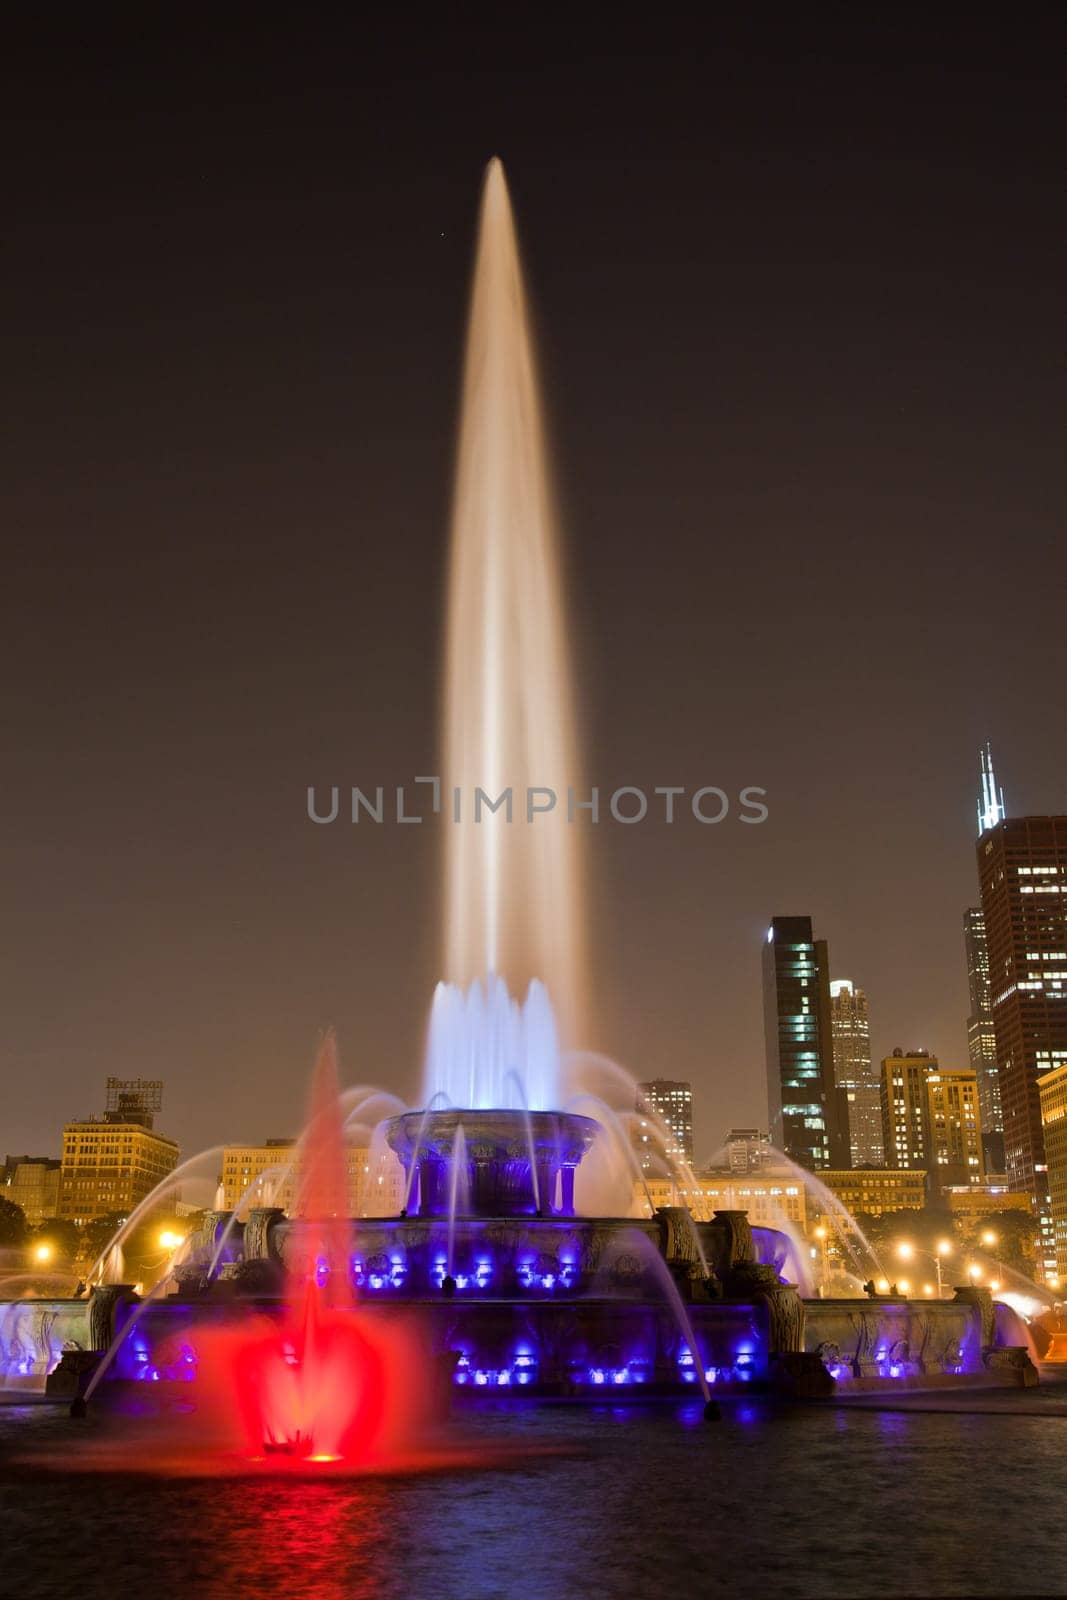 Illuminated Fountain and Skyline at Night in Chicago, Illinois by njproductions